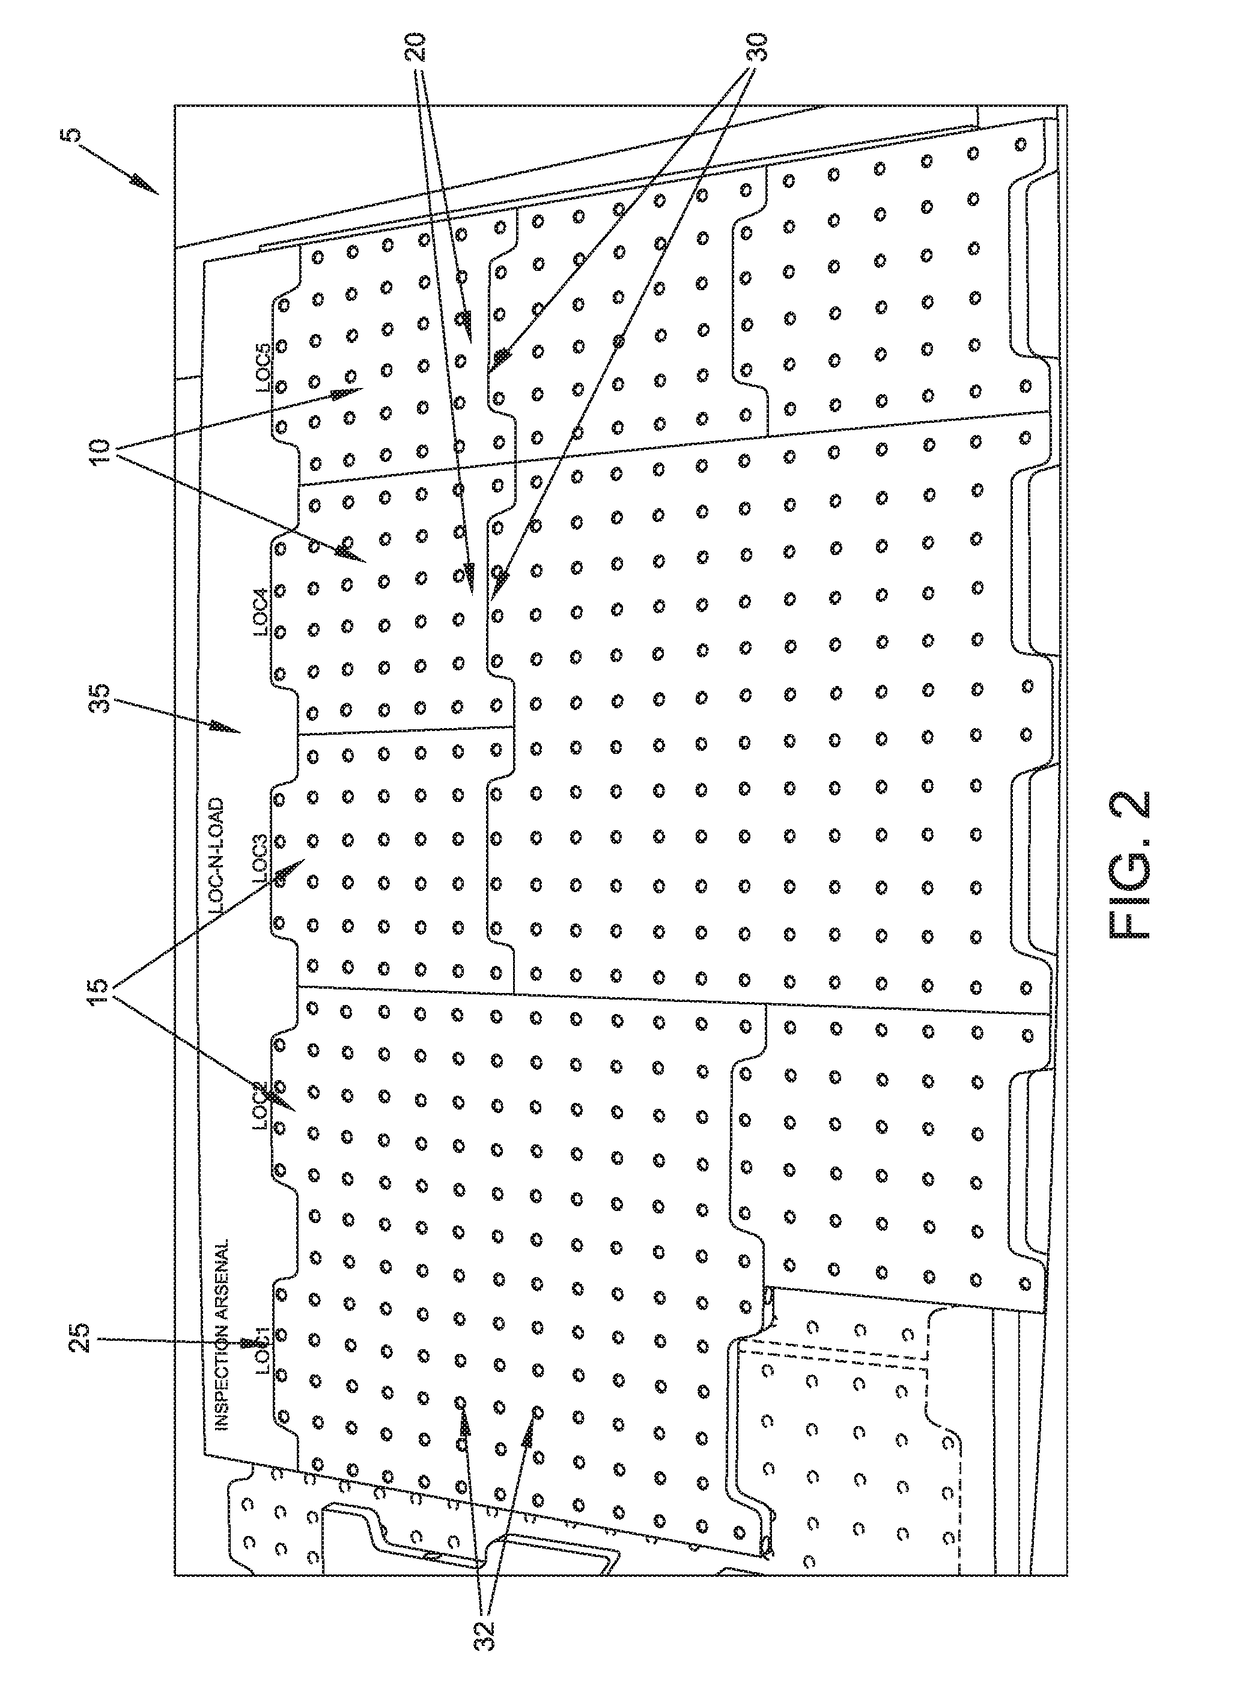 Modular fixture plate system for positioning a workpiece during a manufacturing and/or inspection process